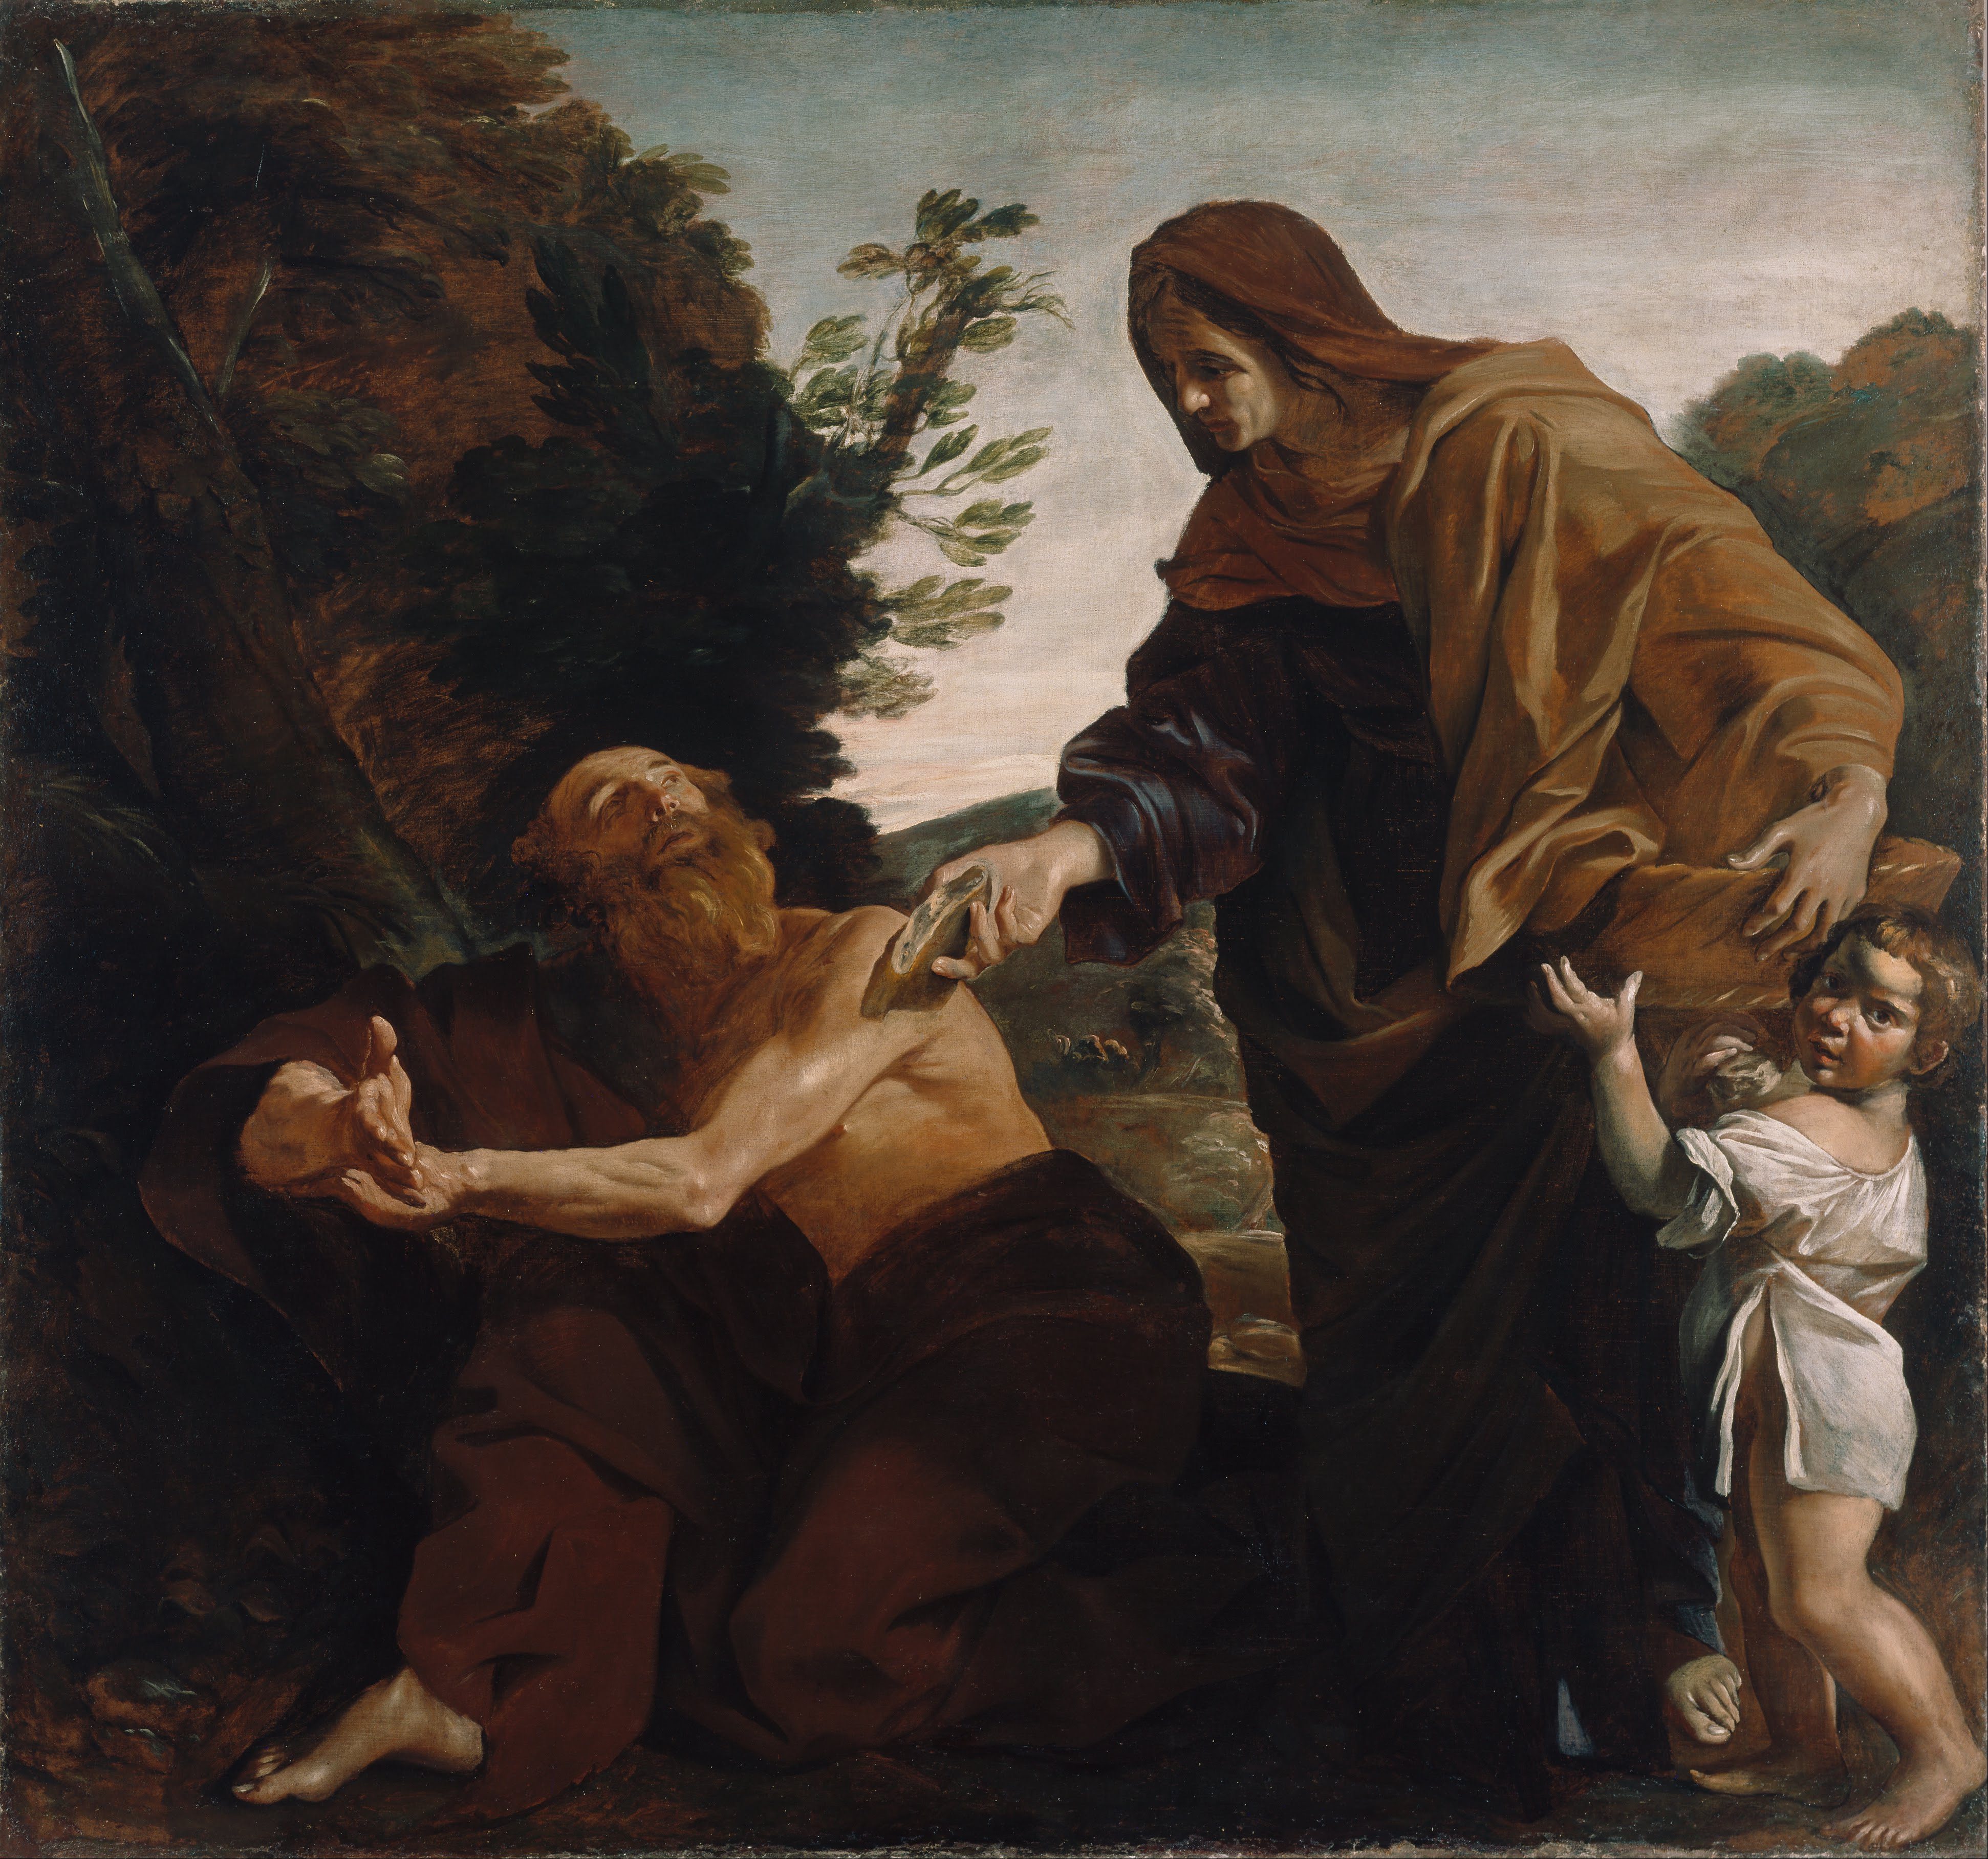 Elijah Receiving Bread from the Widow of Zarephath by painter Giovanni Lanfranco via Wikimedia Commons.